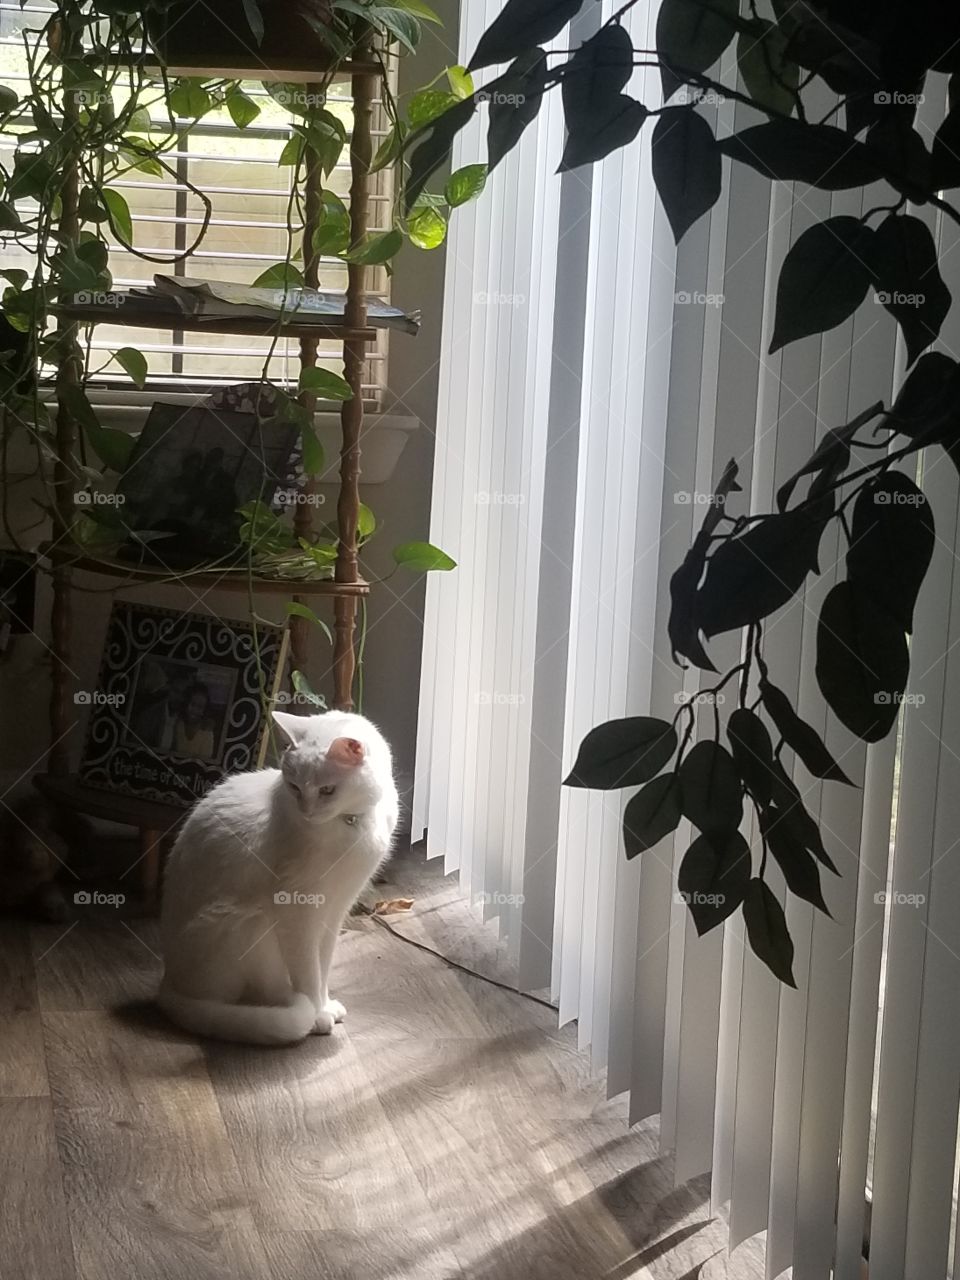 Inner peace. When you can't enjoy the greenery outside, take a note from the little white cat's diary and sunbathe in the window surrounded by indoor plants.